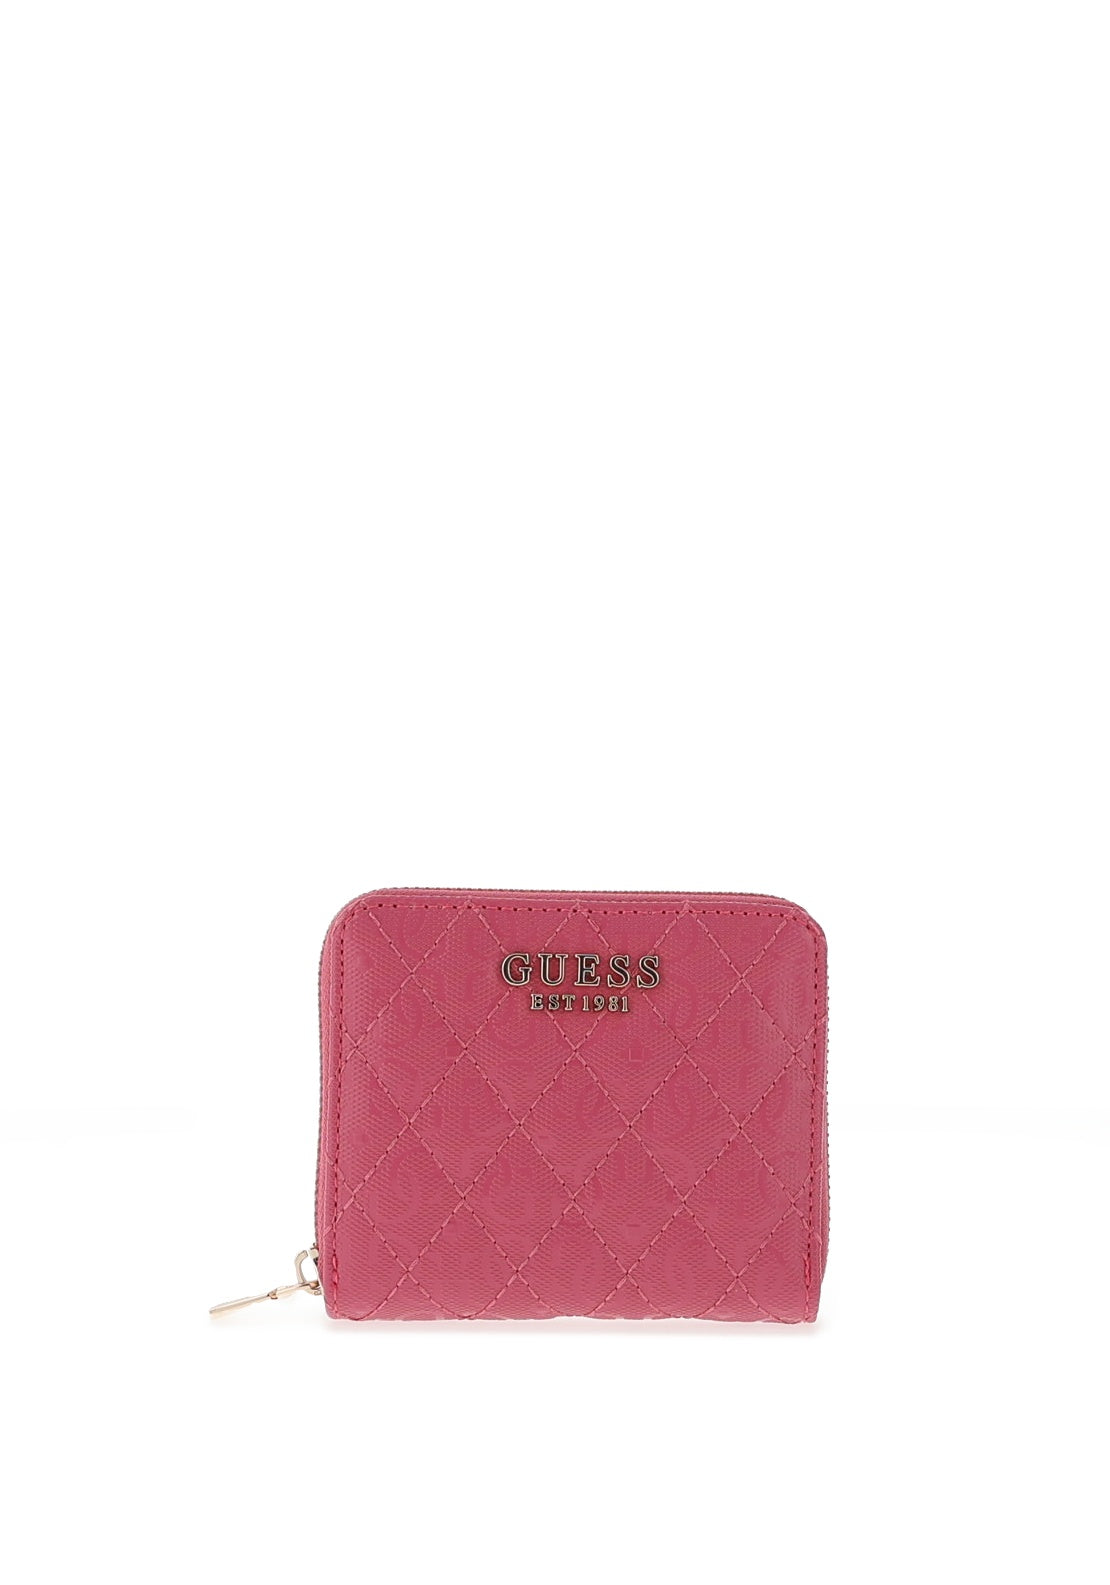 Guess Yarmilla Quilted Small Wallet, Mulberry - McElhinneys